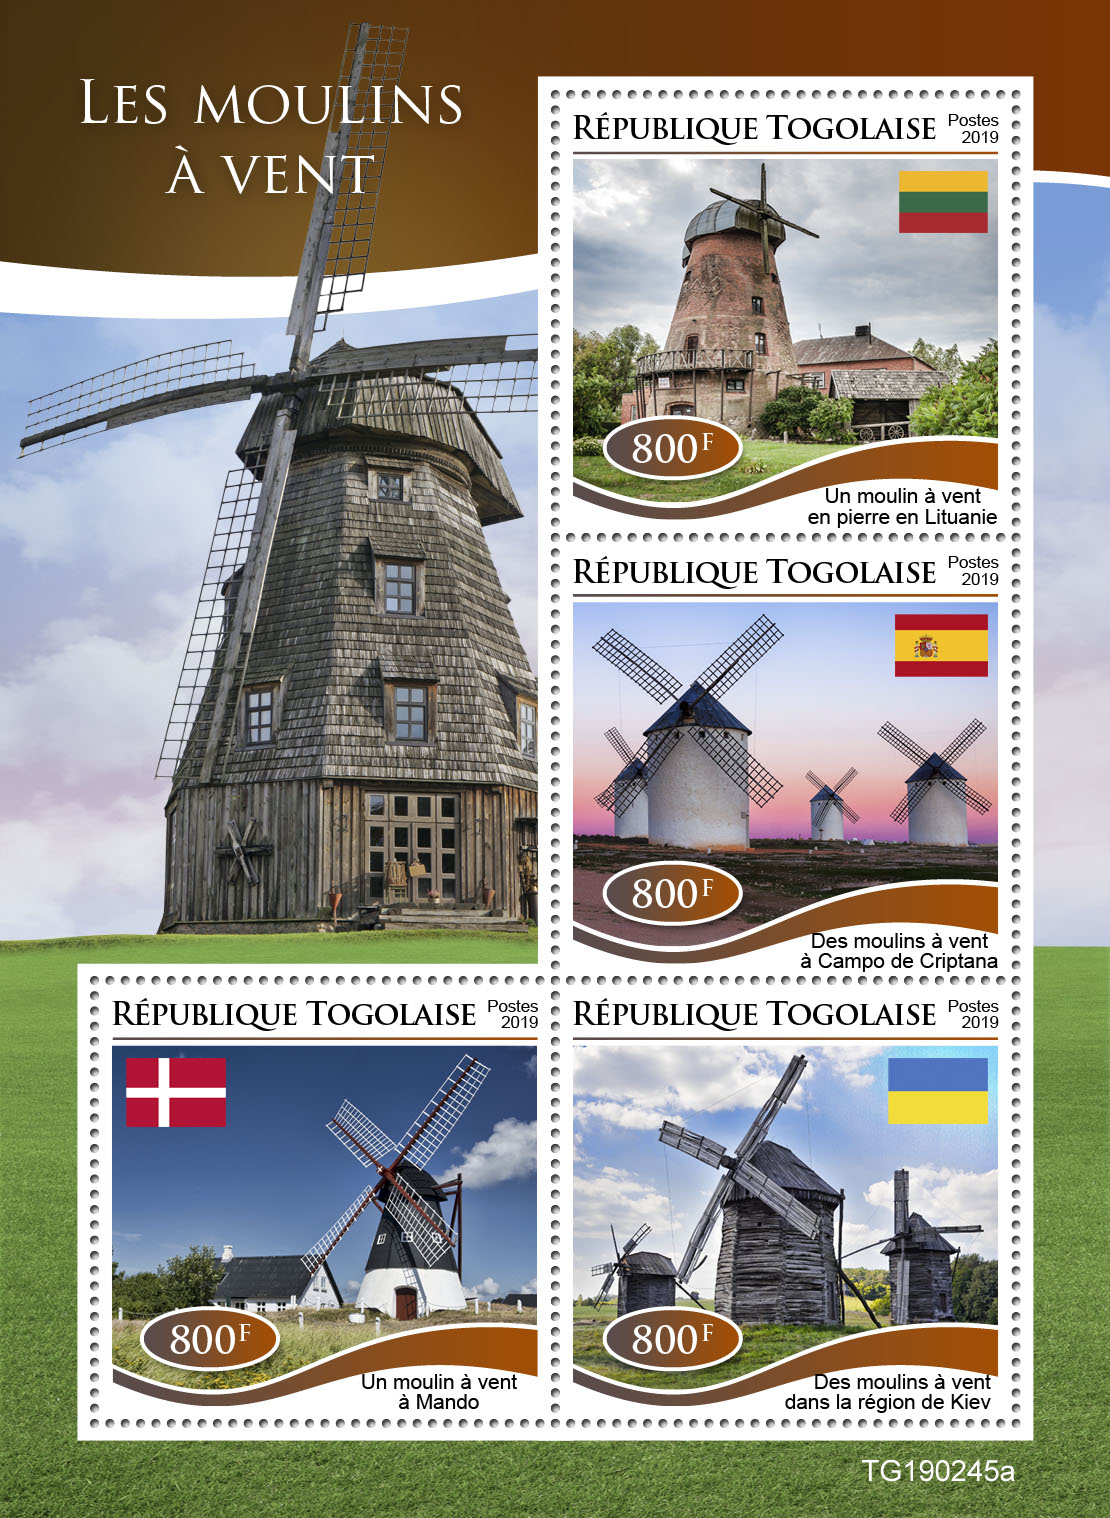 Windmills - Issue of Togo postage stamps